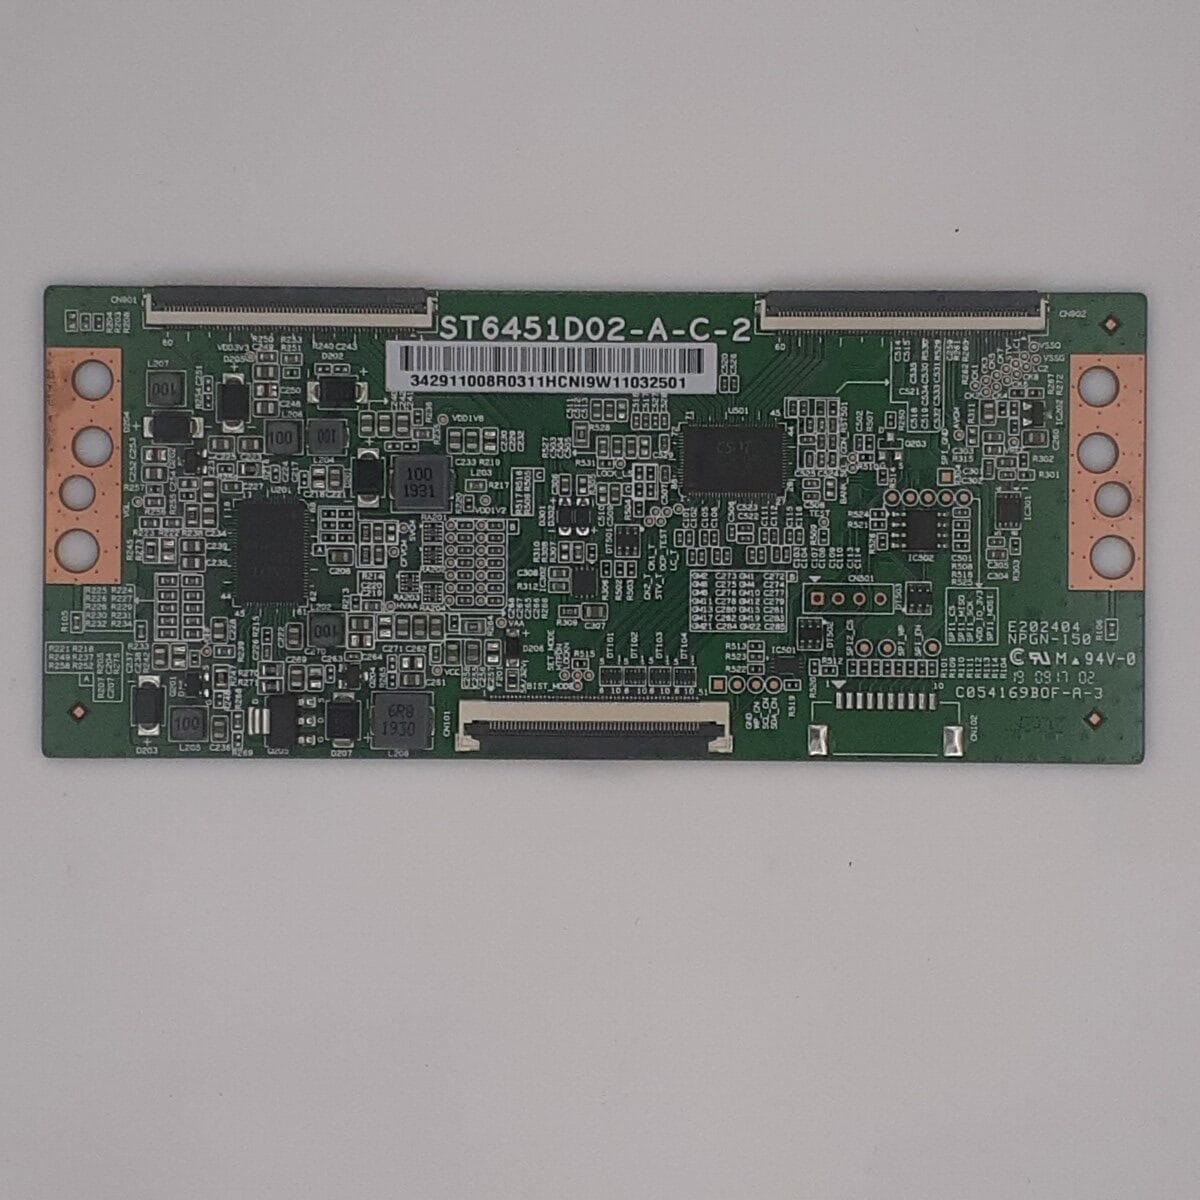 ST6451D02-A-C-2 T-CON BOARD FOR LED TV 3nos